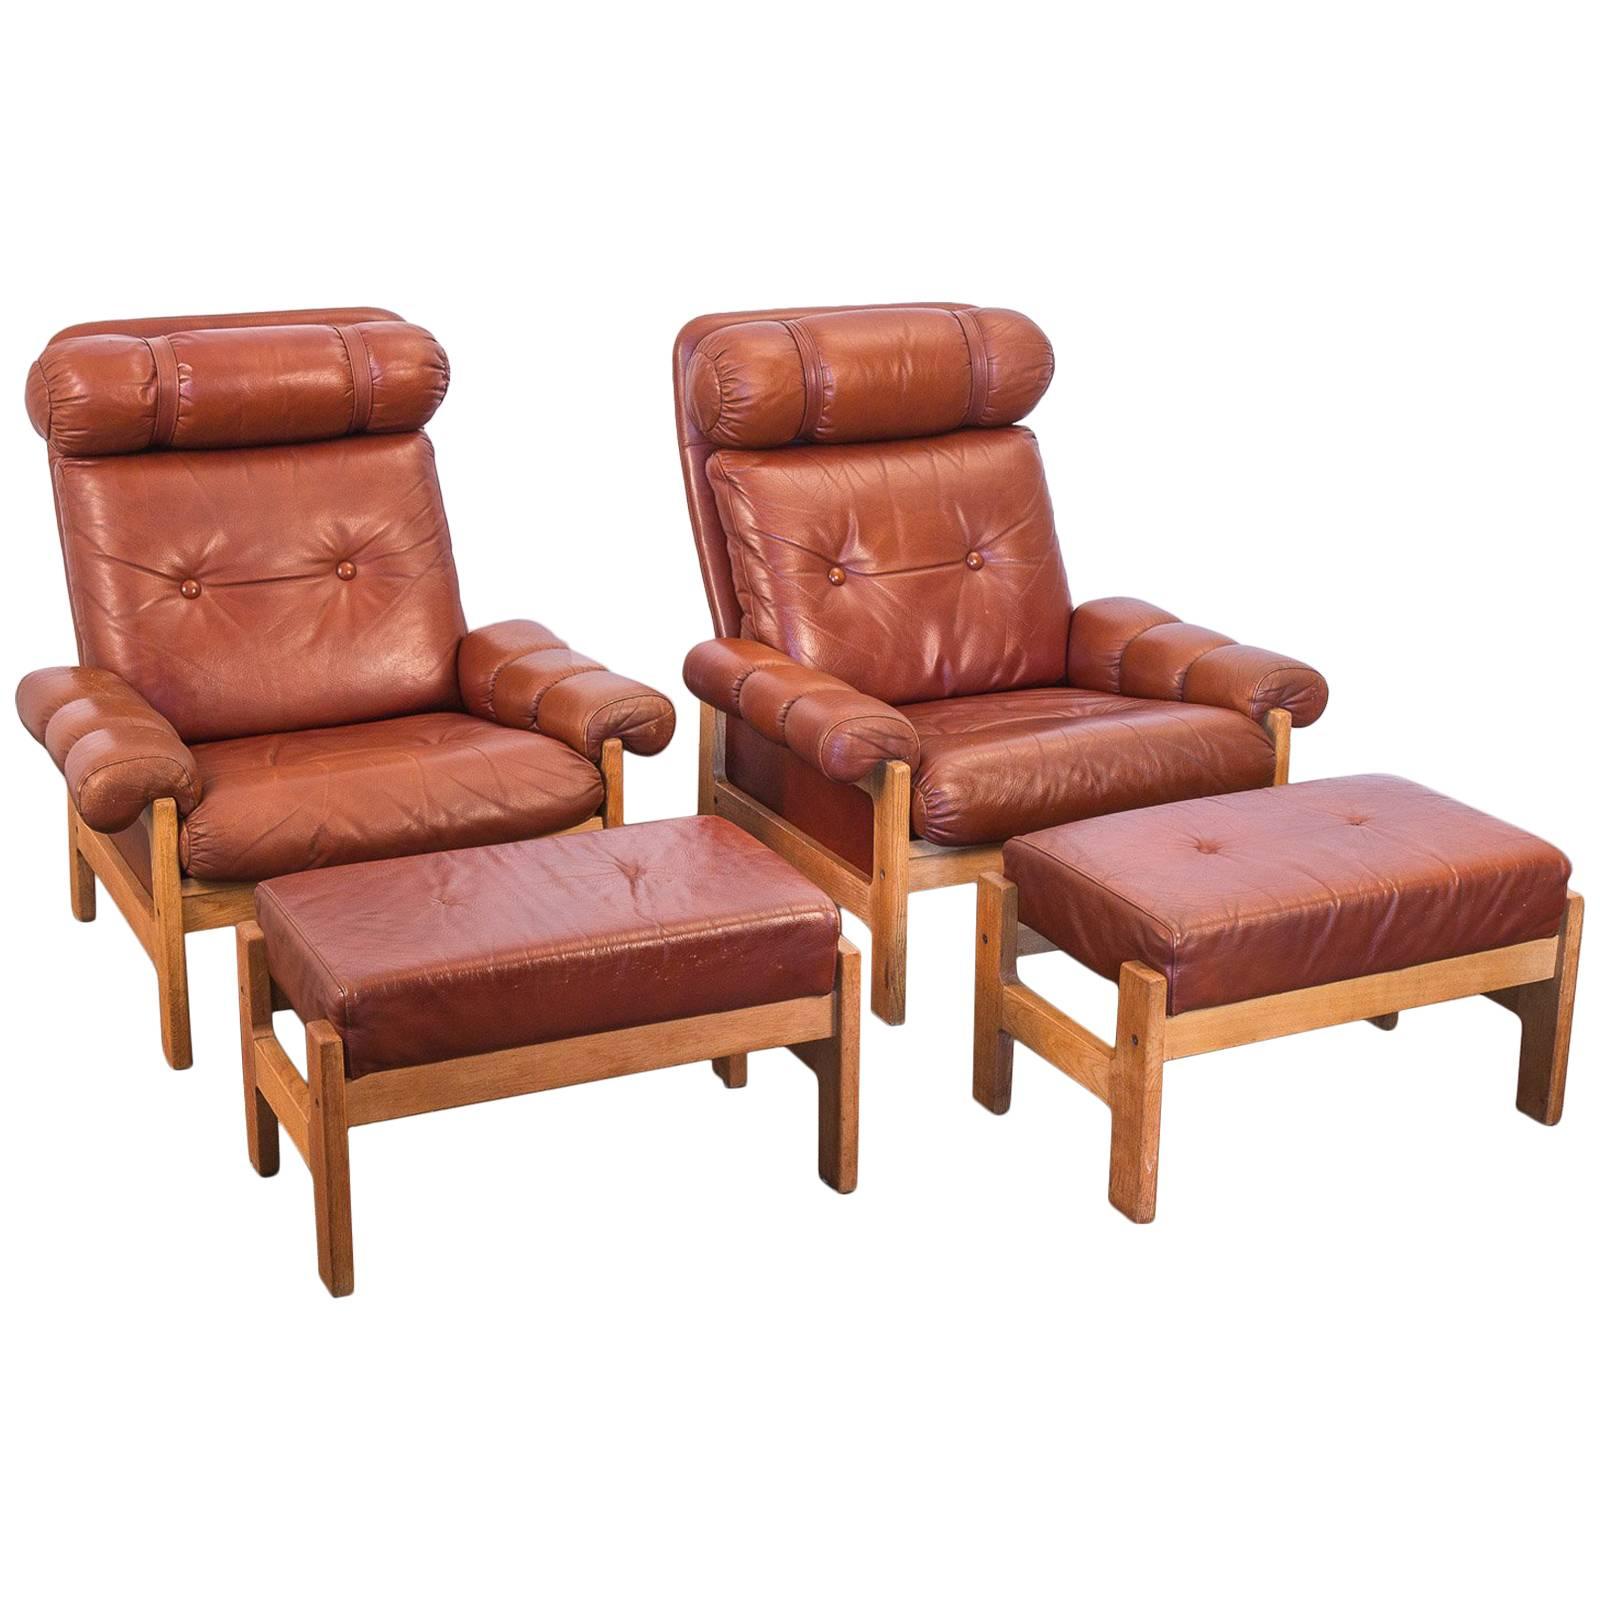 Pair of Tufted Chestnut Lounge Chairs